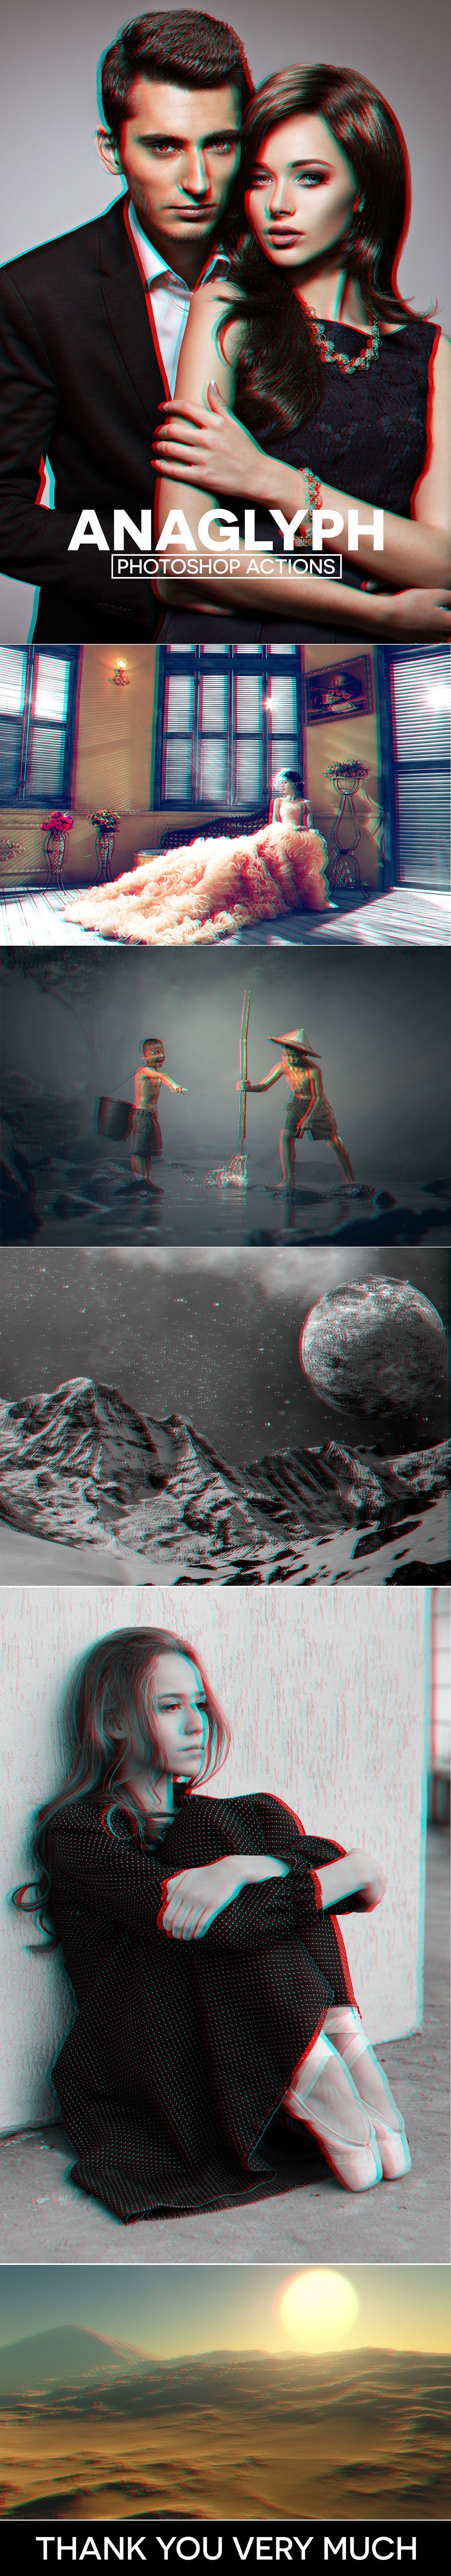 anaglyph full preview cm display 540